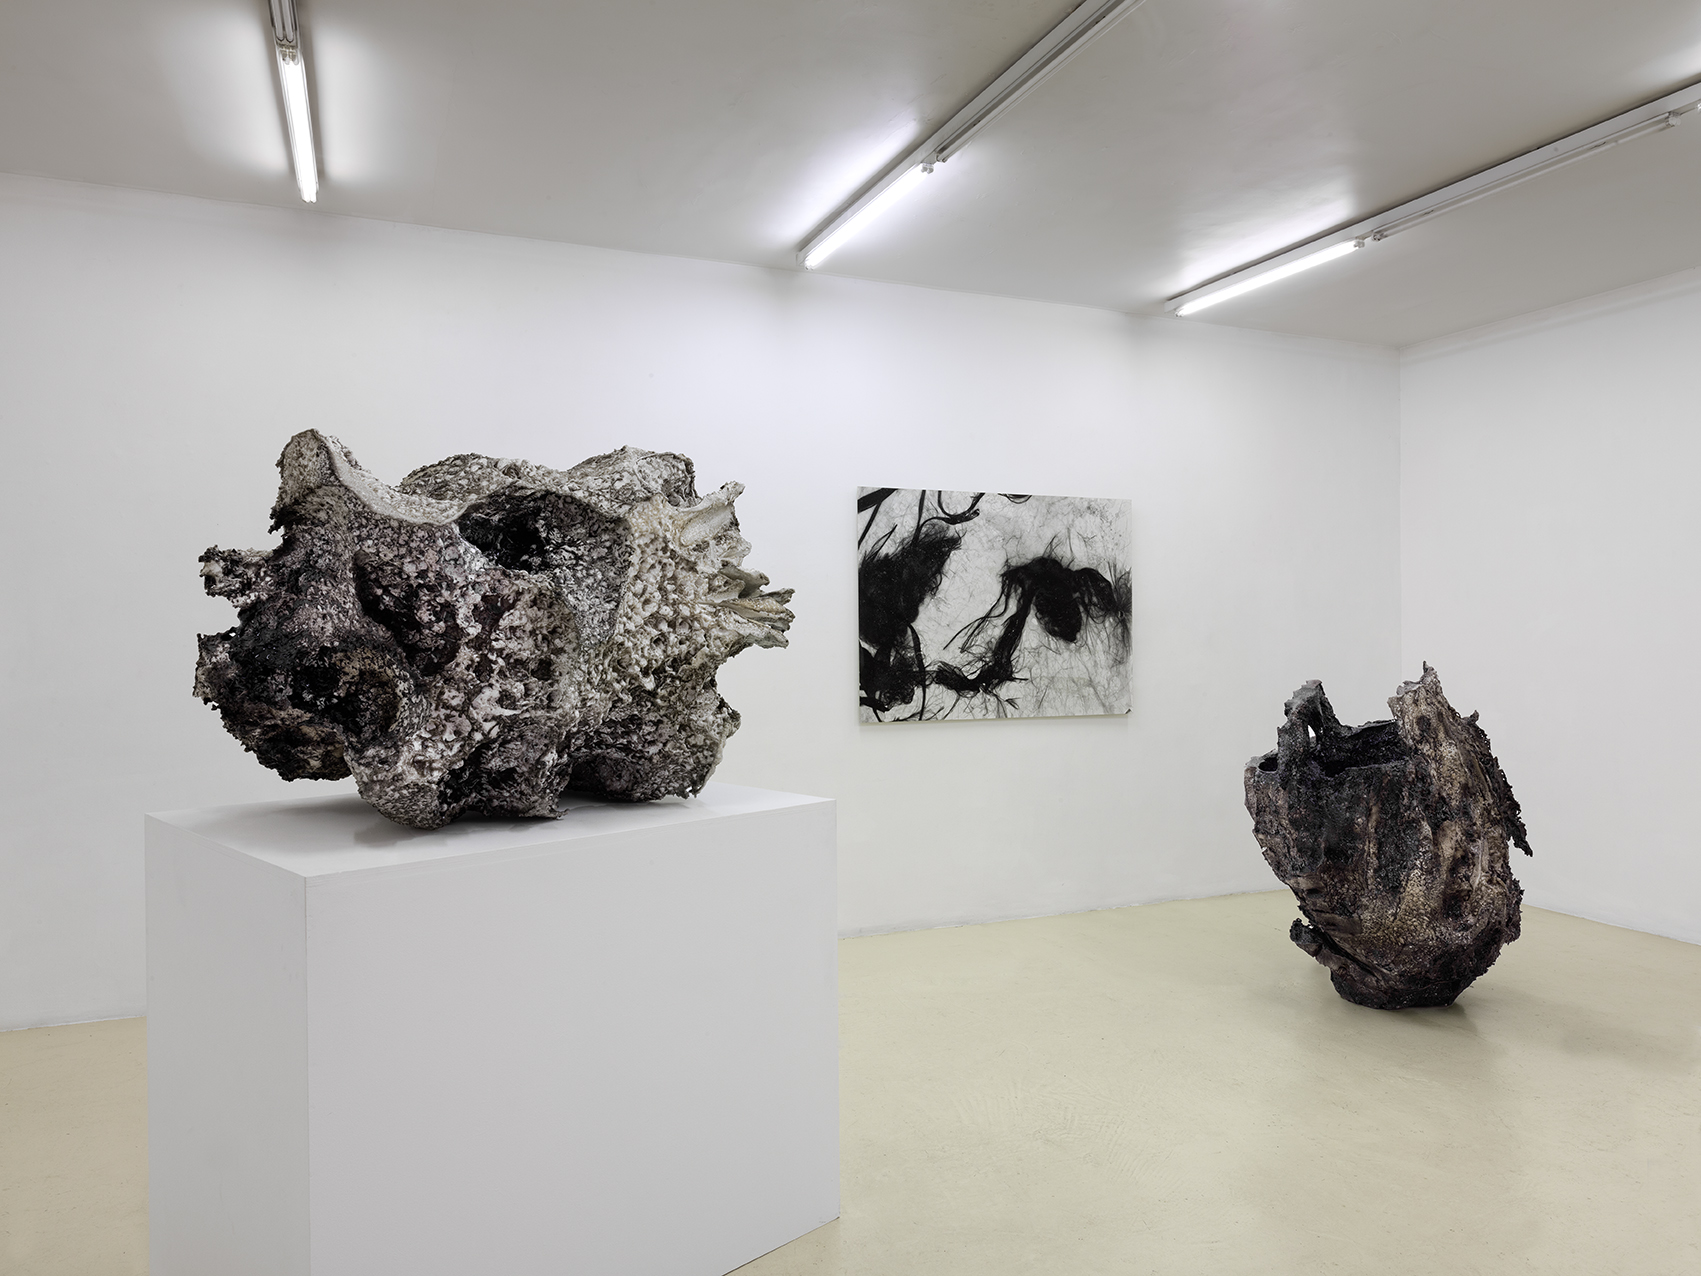  Installation view, galerie Jean Brolly Paris, France 